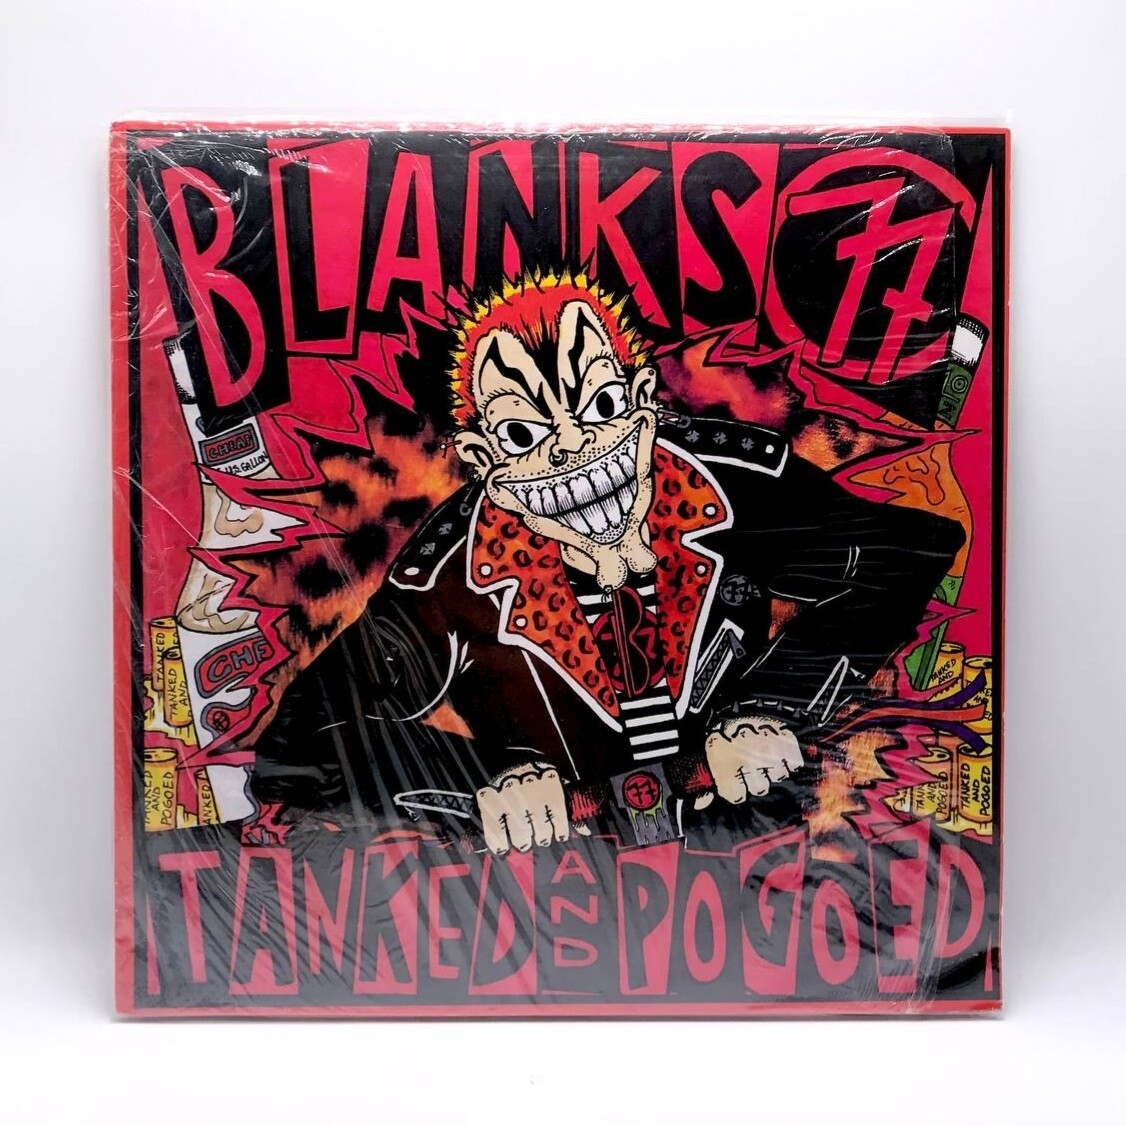 [USED] BLANK 77 -TANKED AND POGOED - LP